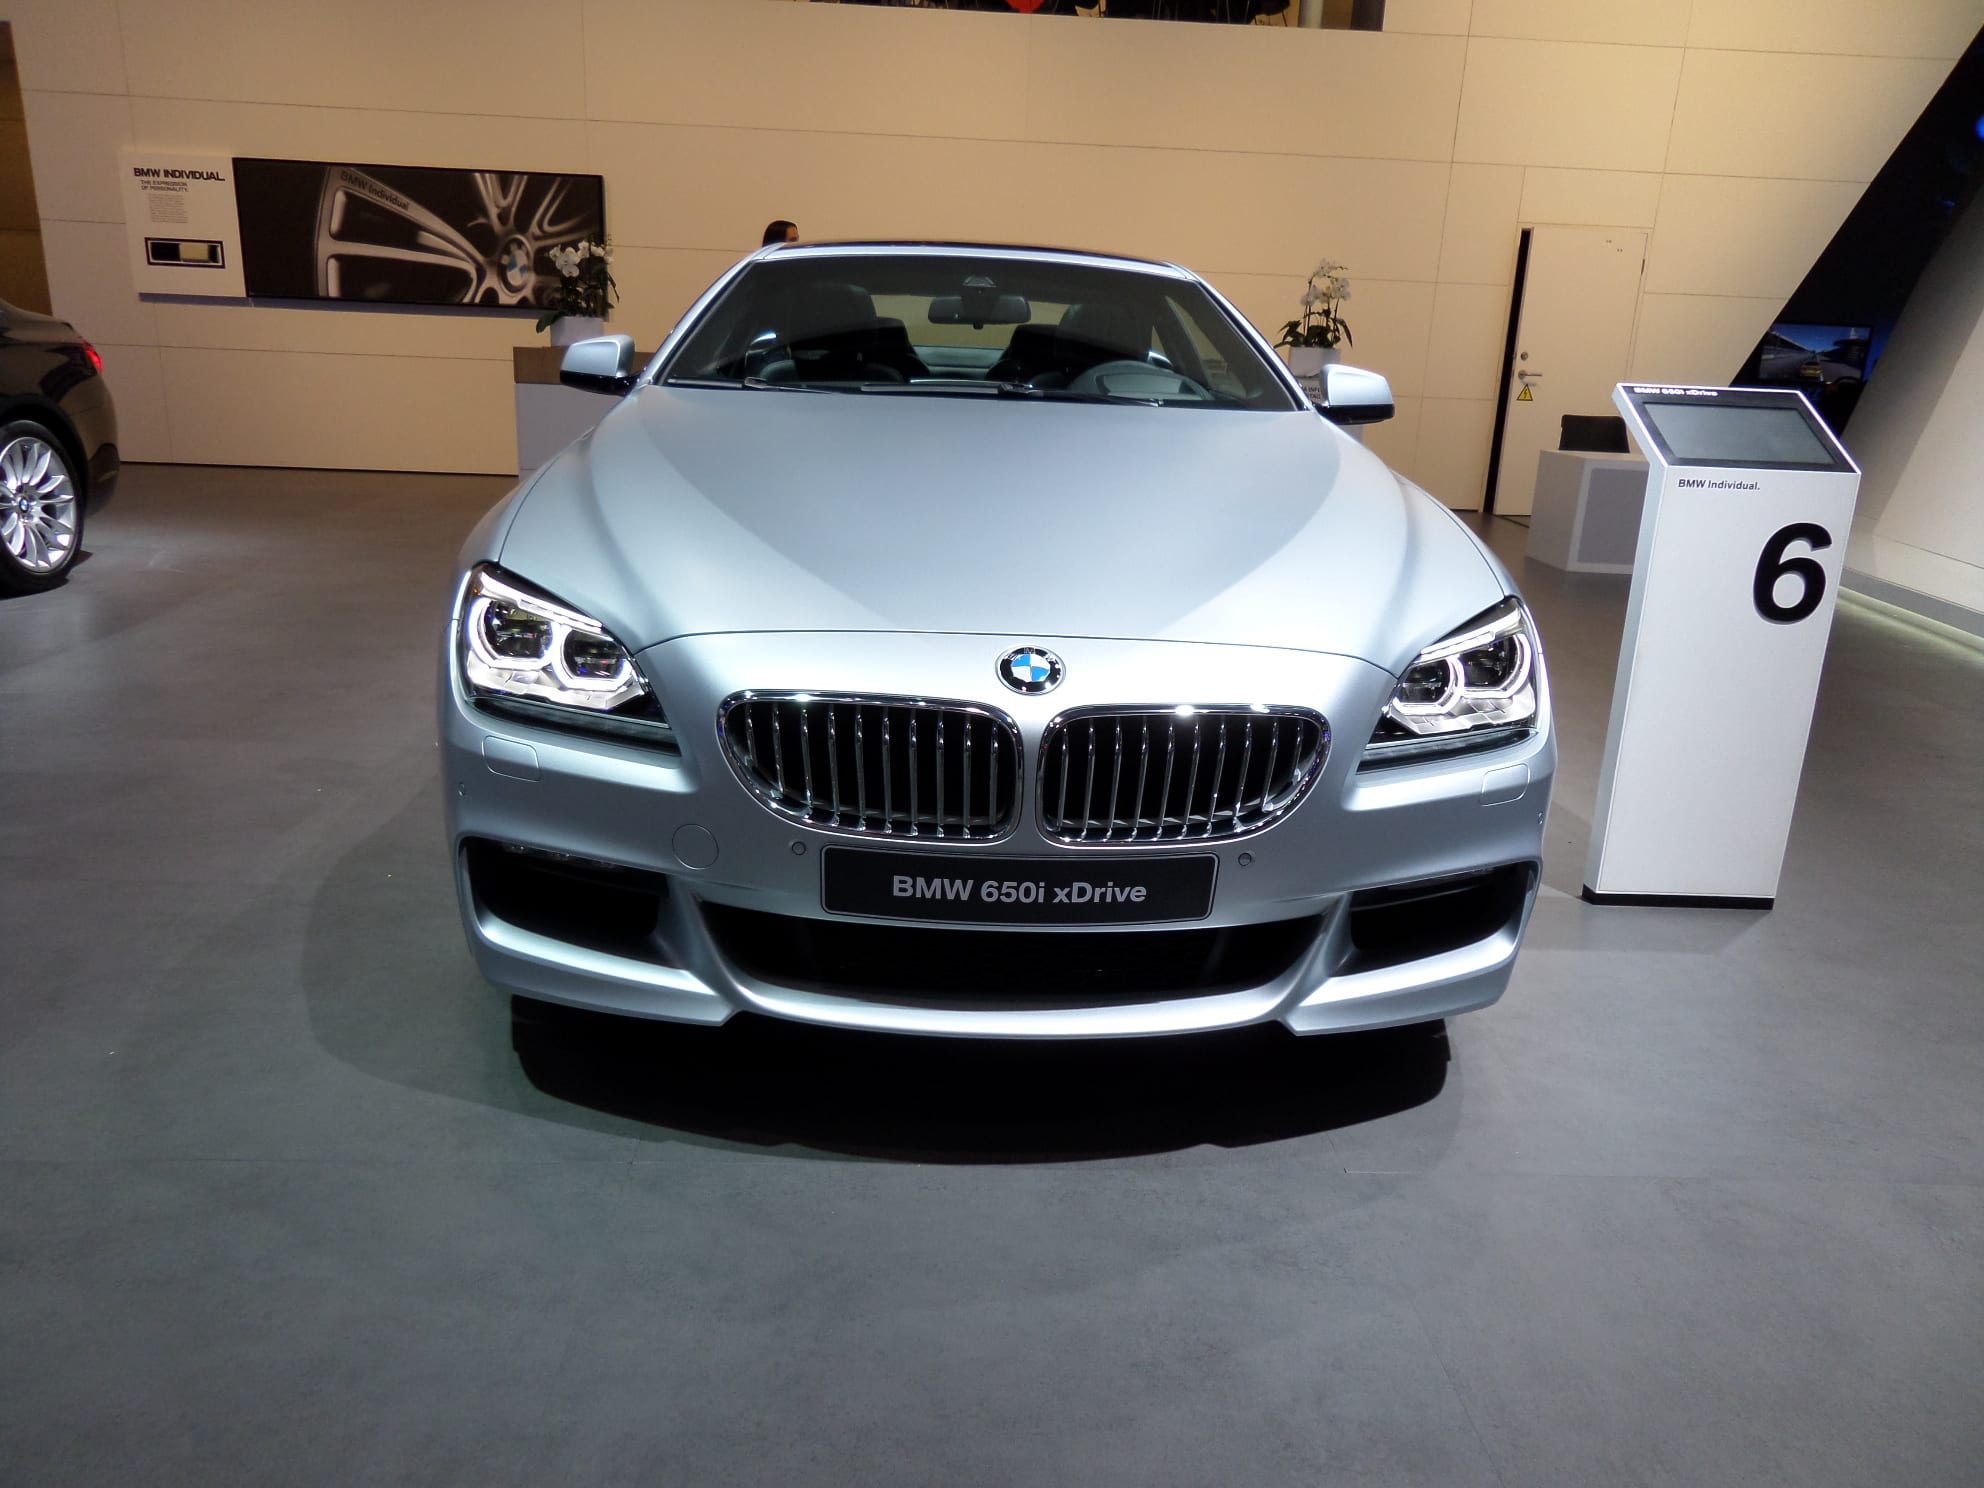 BMW 650i xDrive car- Front End